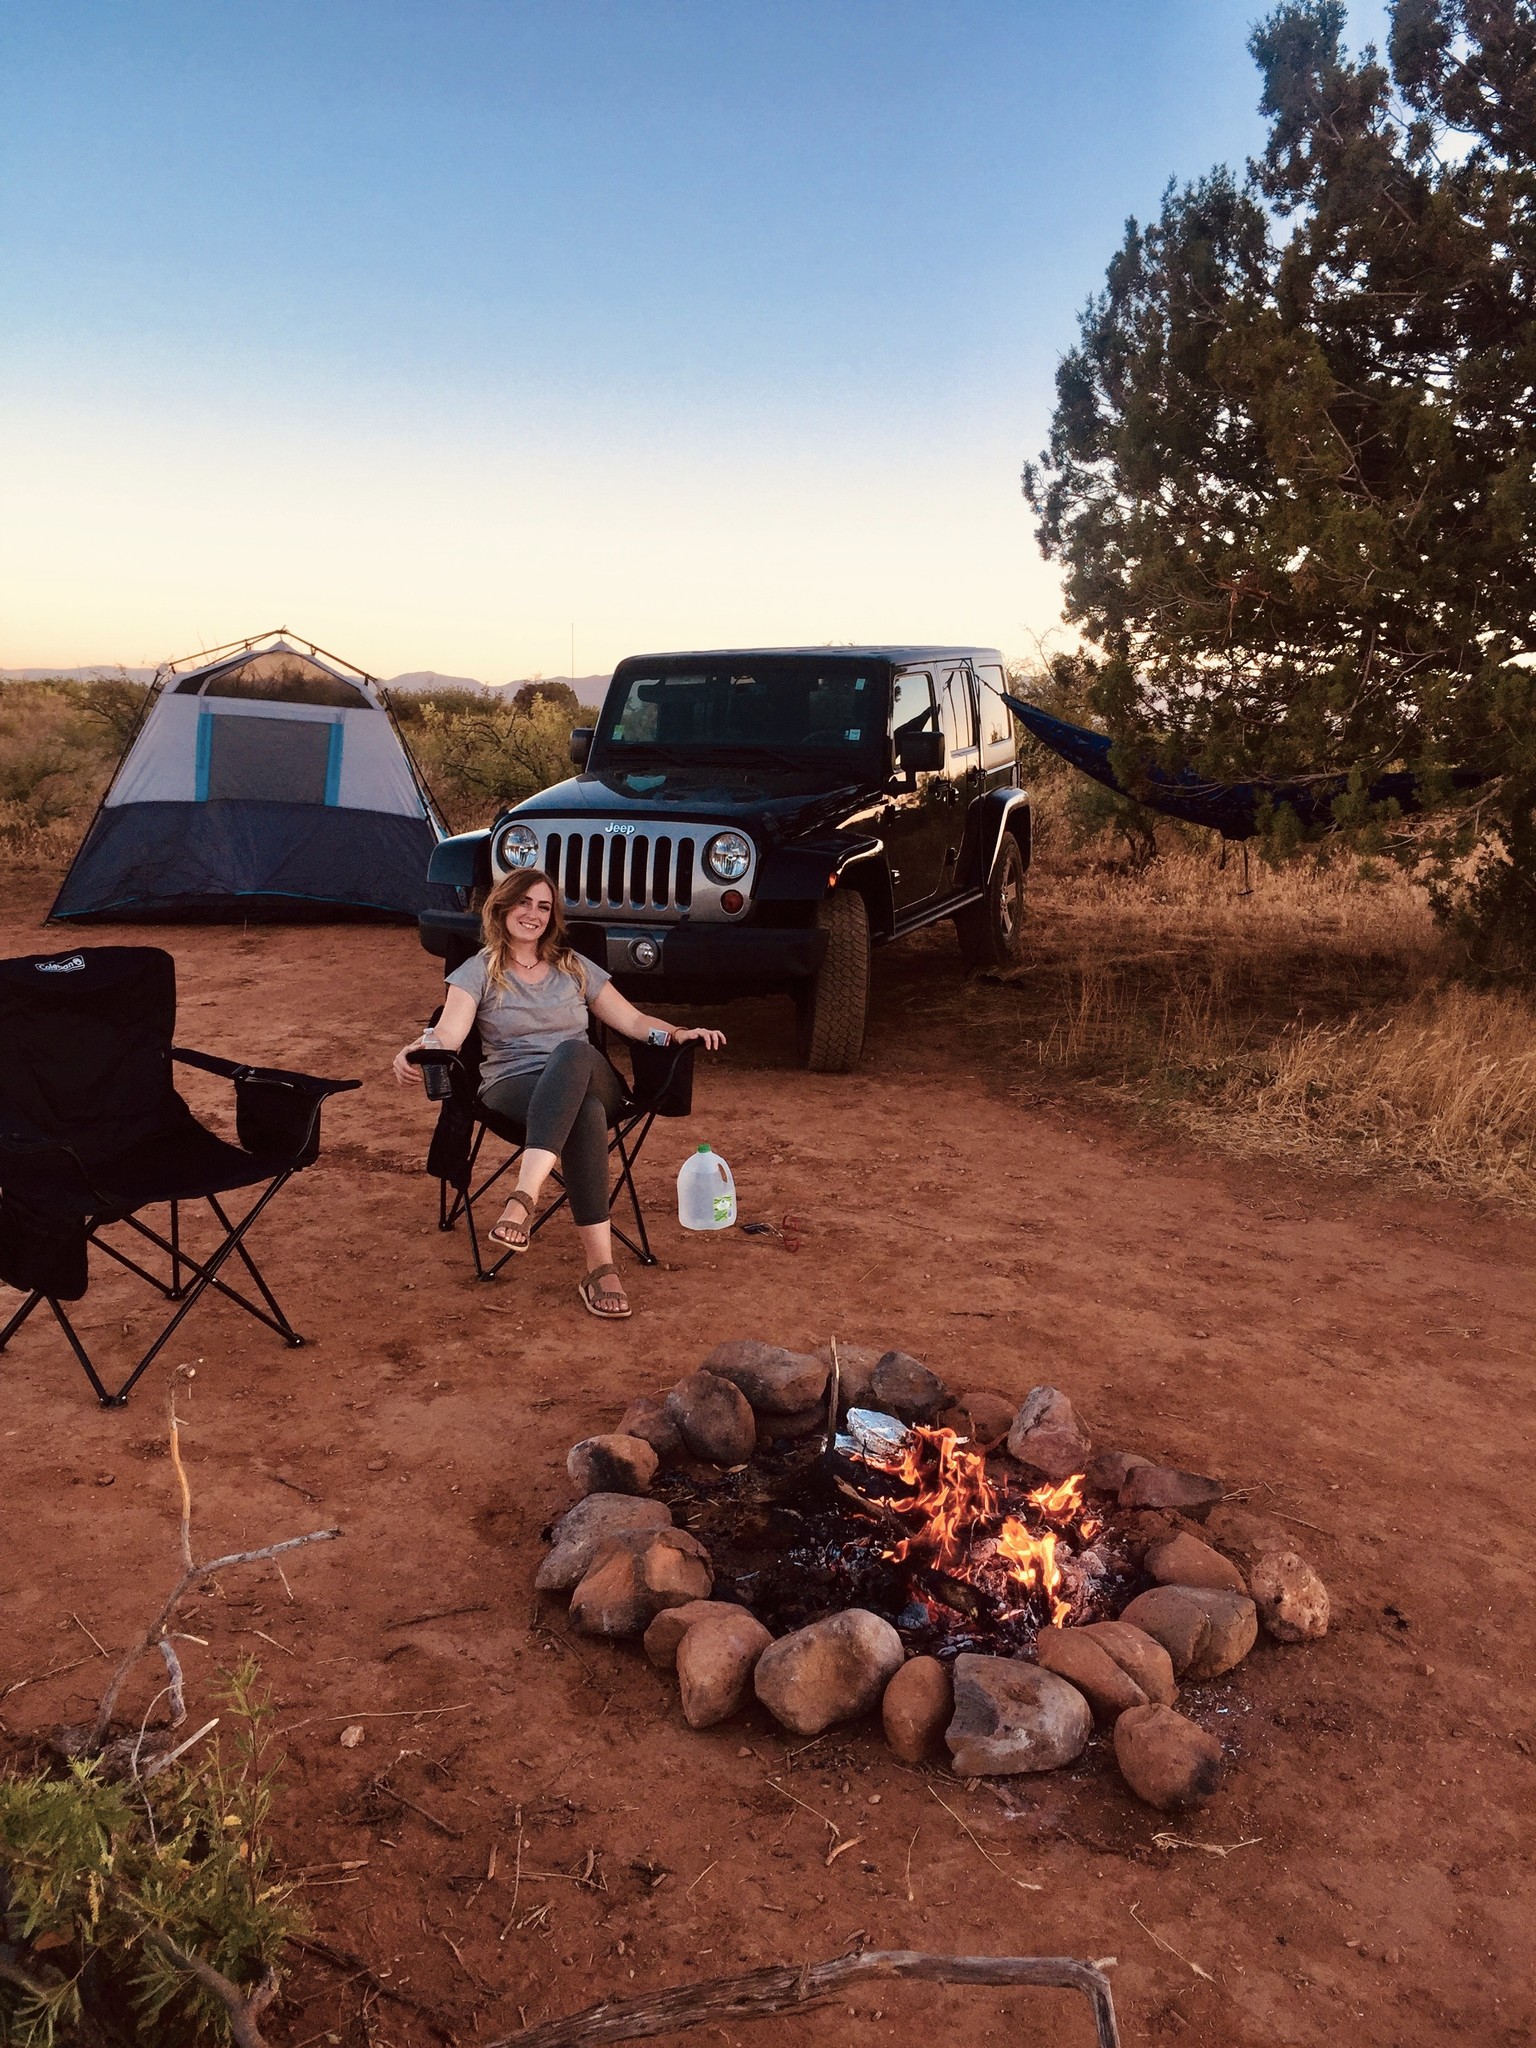 Campsite with Jeep, Tent, Chair, and Fire